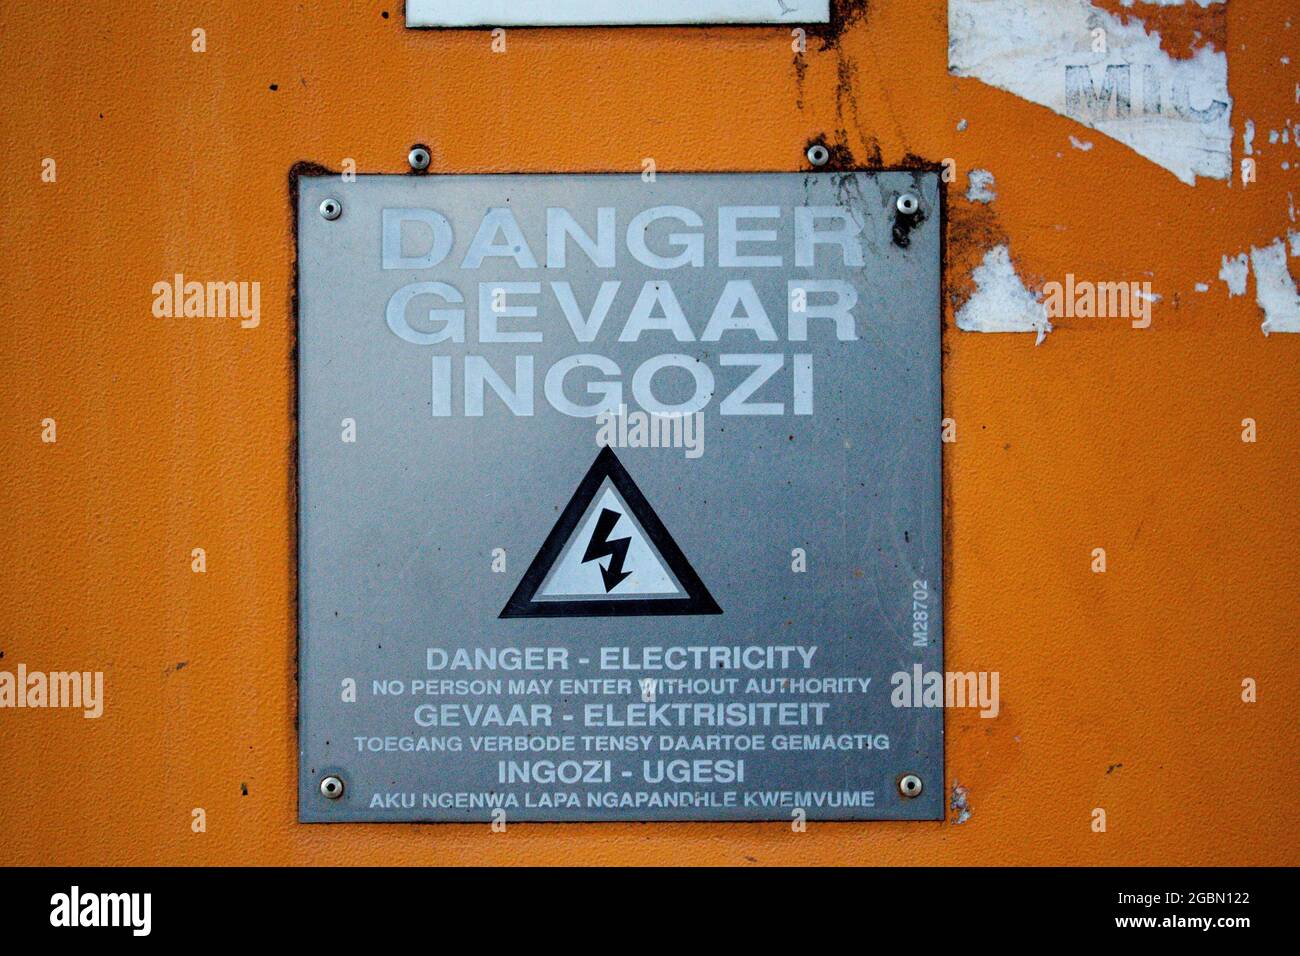 Warning sign with an electricity danger warning in English, Dutch, and Zulu on an orange wall Stock Photo